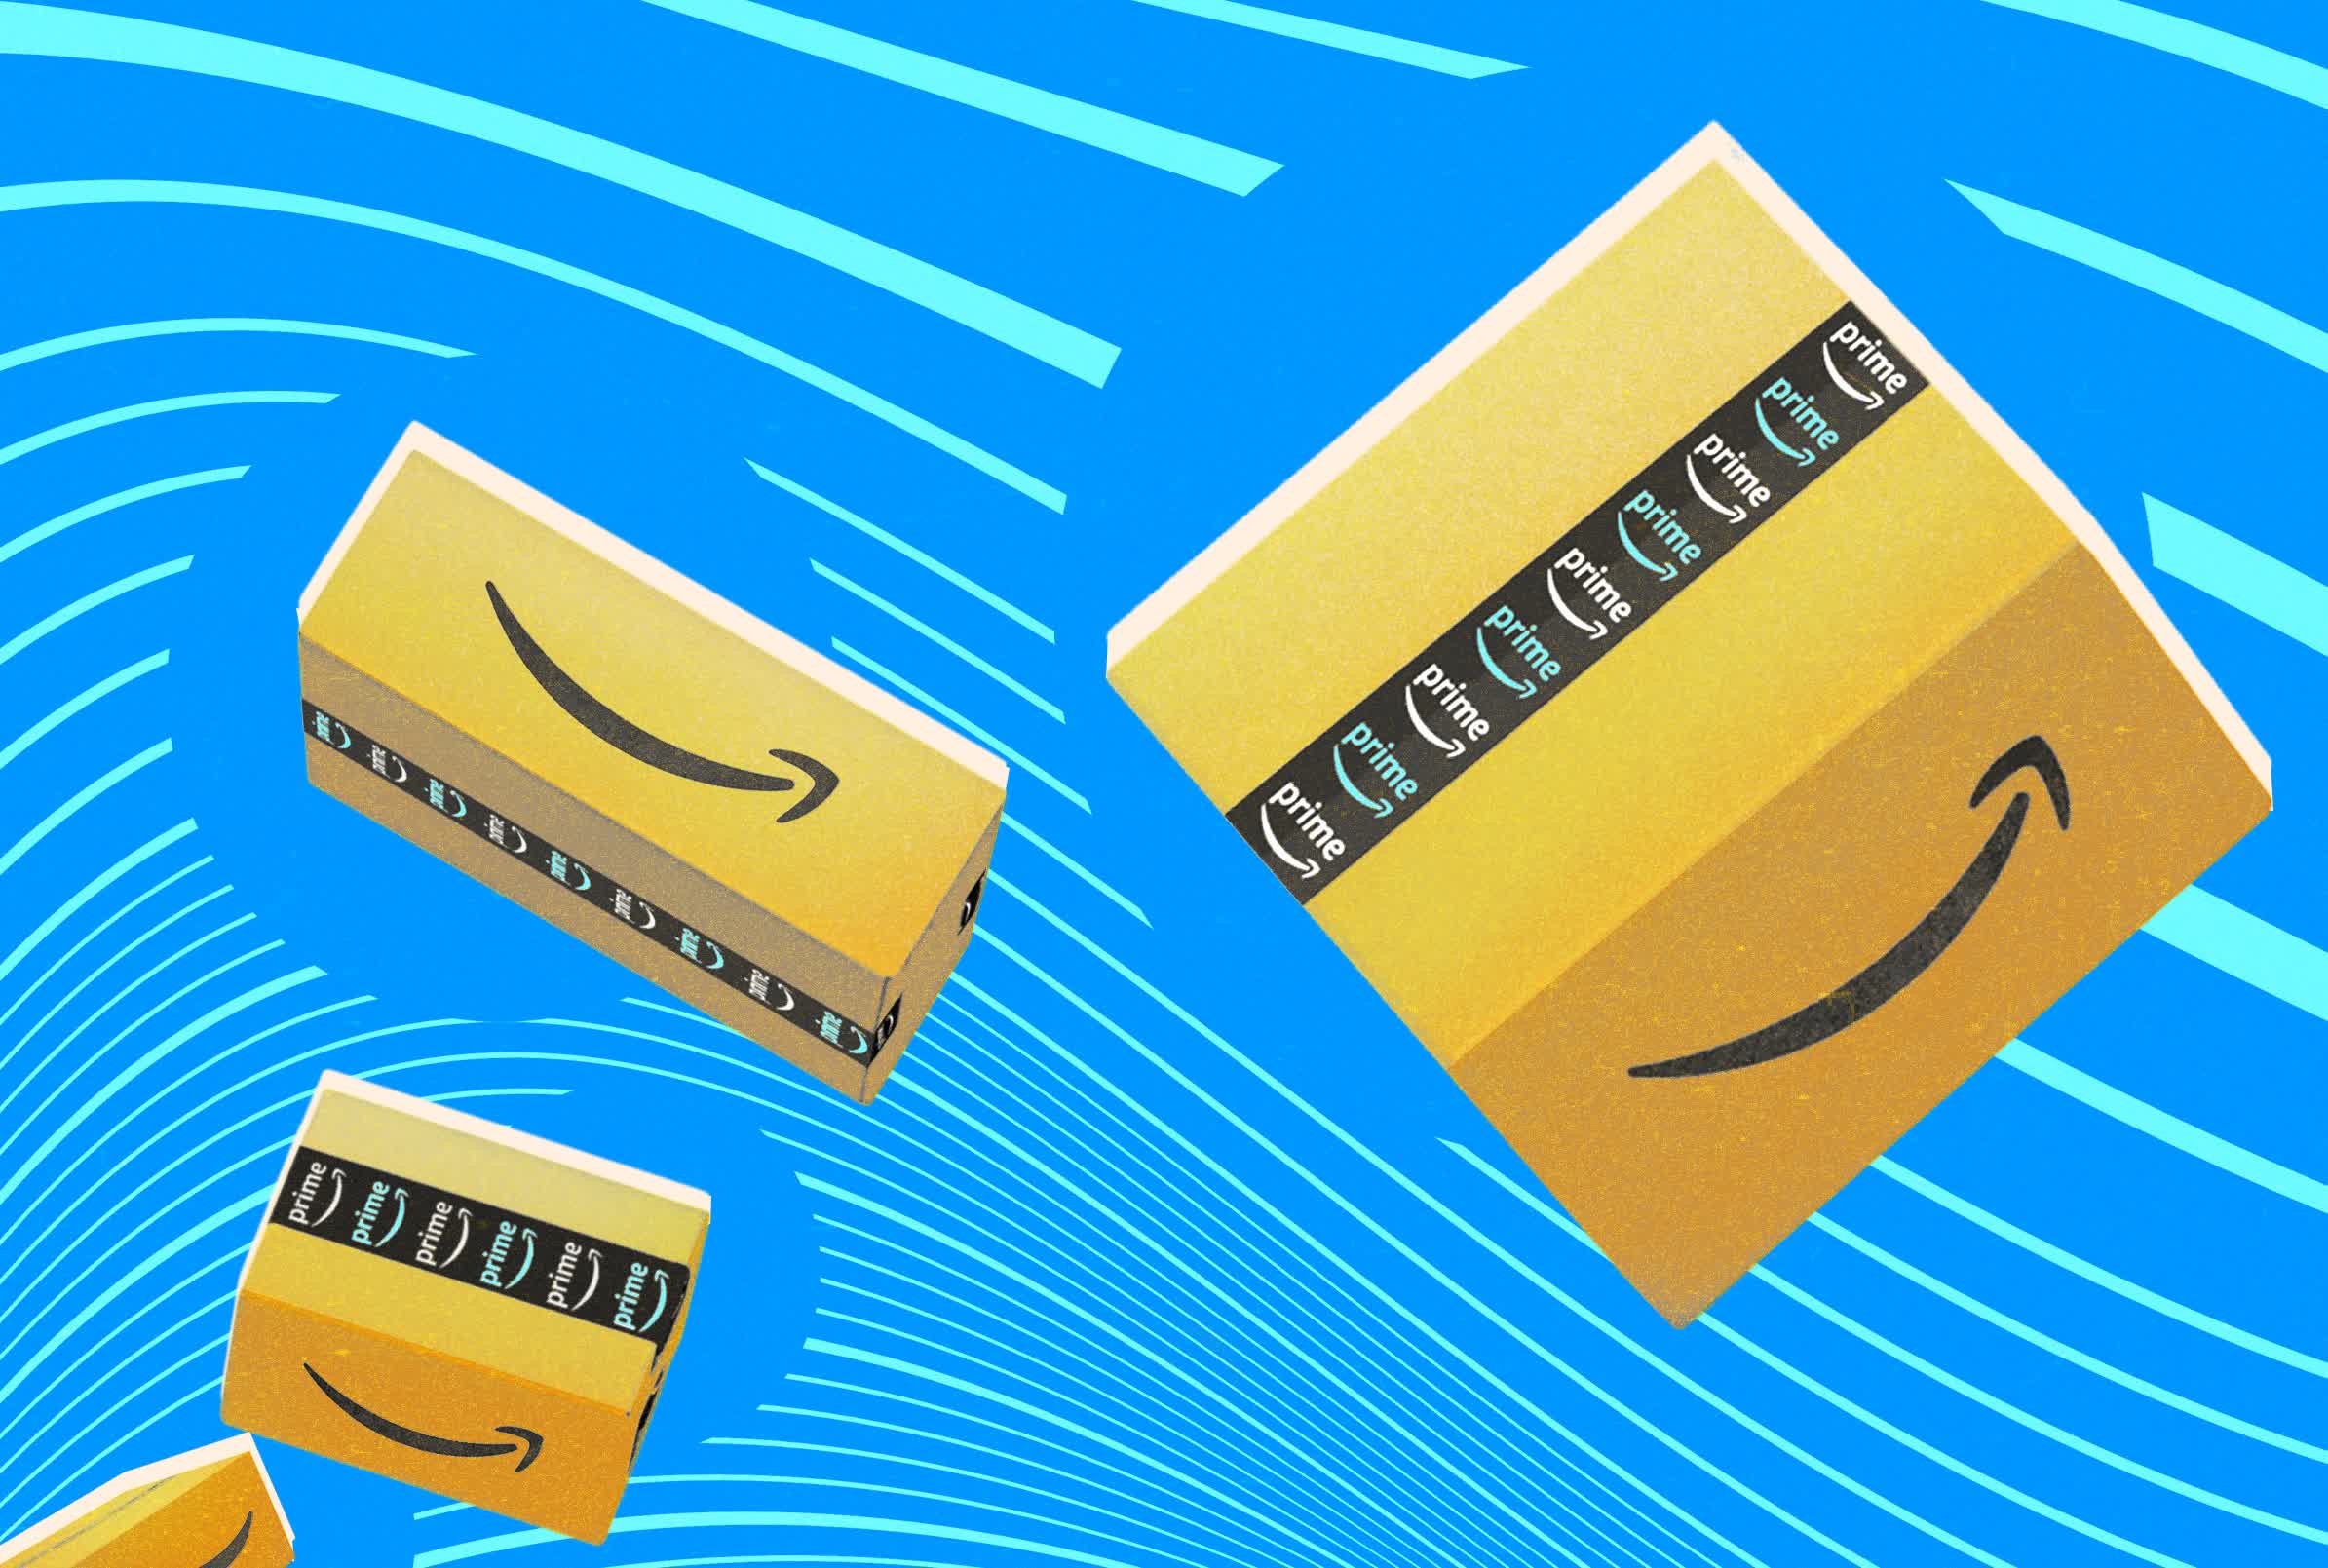 Prime Day tech deals: Our top choices for this year's event